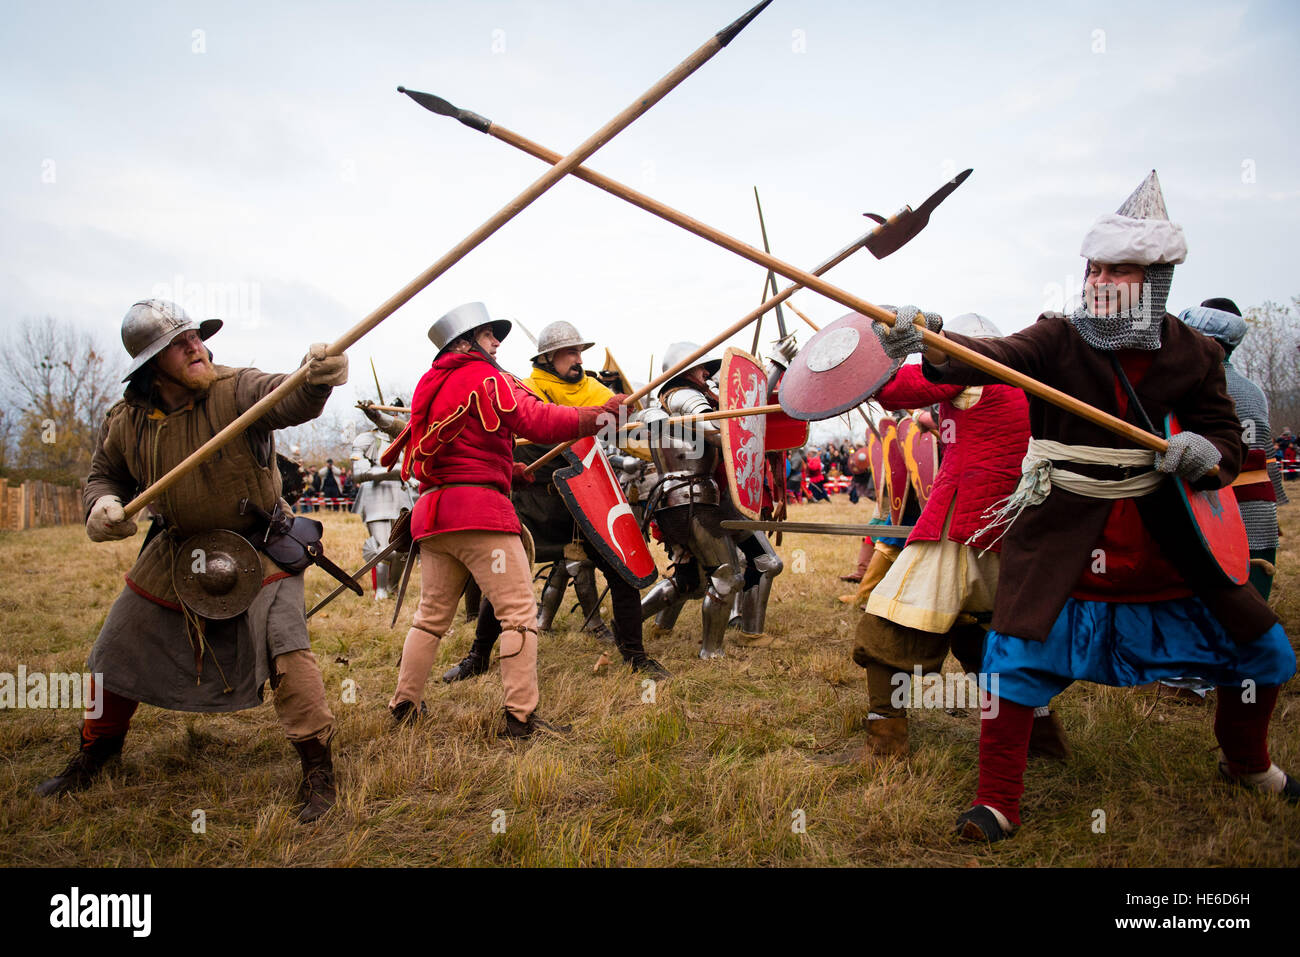 Bulgarian, Turkish, Czech, Hungarian and other countries amateur actors re-enact a scene from the battle of Polish King Wladyslaw III Warnenczyk against Ottoman Turks 572 years ago near the town of Varna, some 450 kilometers (260 miles) east of Sofia, Bulgaria on Saturday, Nov. 12, 2016. Wladislav III set out with a small army on a crusade against the Turks, but fell in a major battle in 1444 near Varna, Eastern Bulgaria where is his symbolic grave. The battle saw a ragtag christian army of mixed nationalities fighting against a force of Ottoman turks. About a hundred history enthusiasts and a Stock Photo